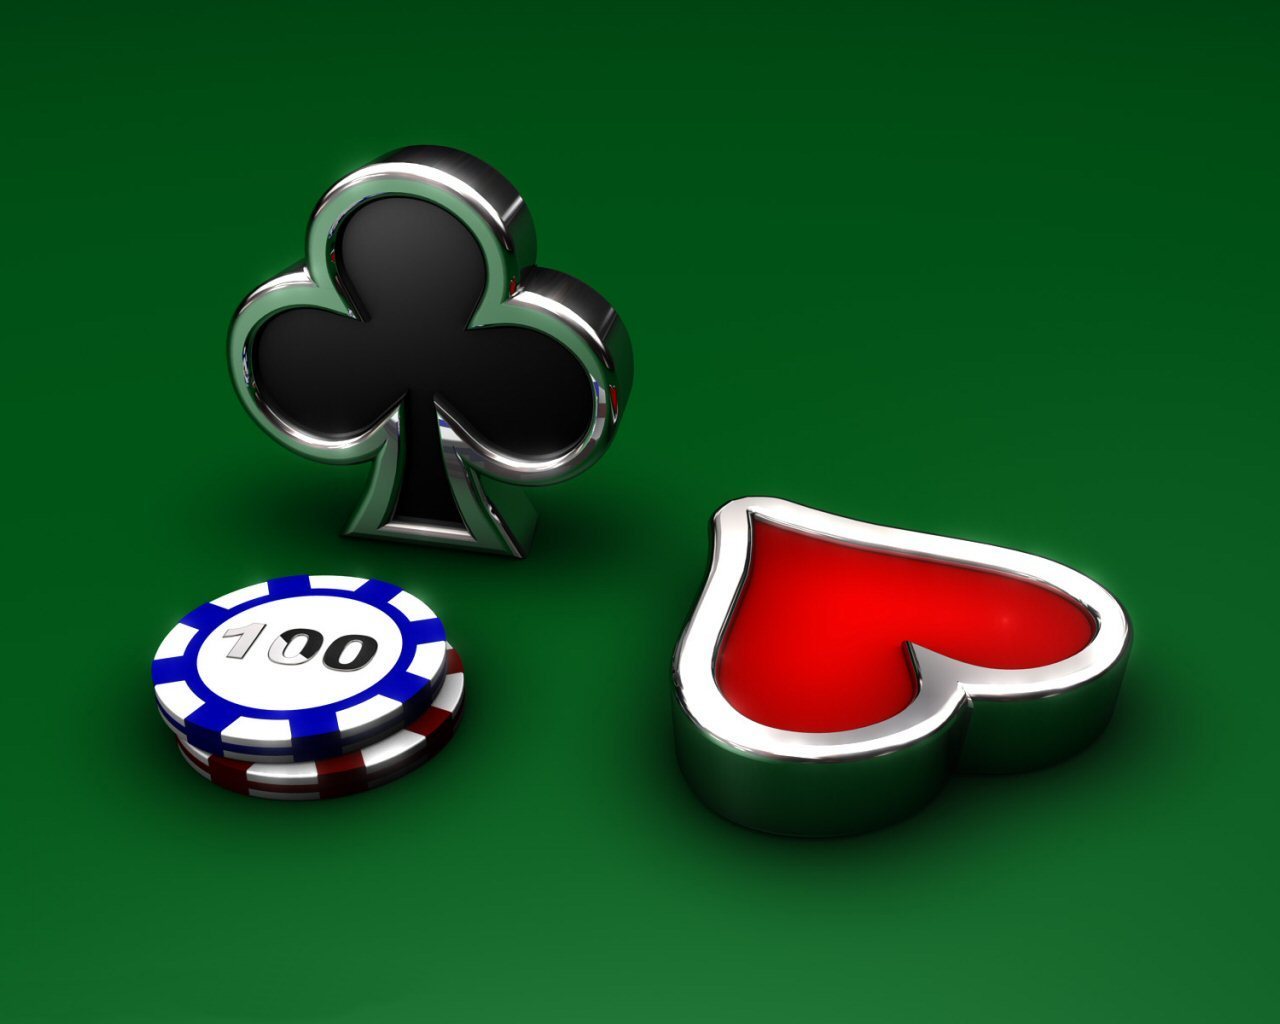 Online Casino Singapore: A Convenient Way to Gamble